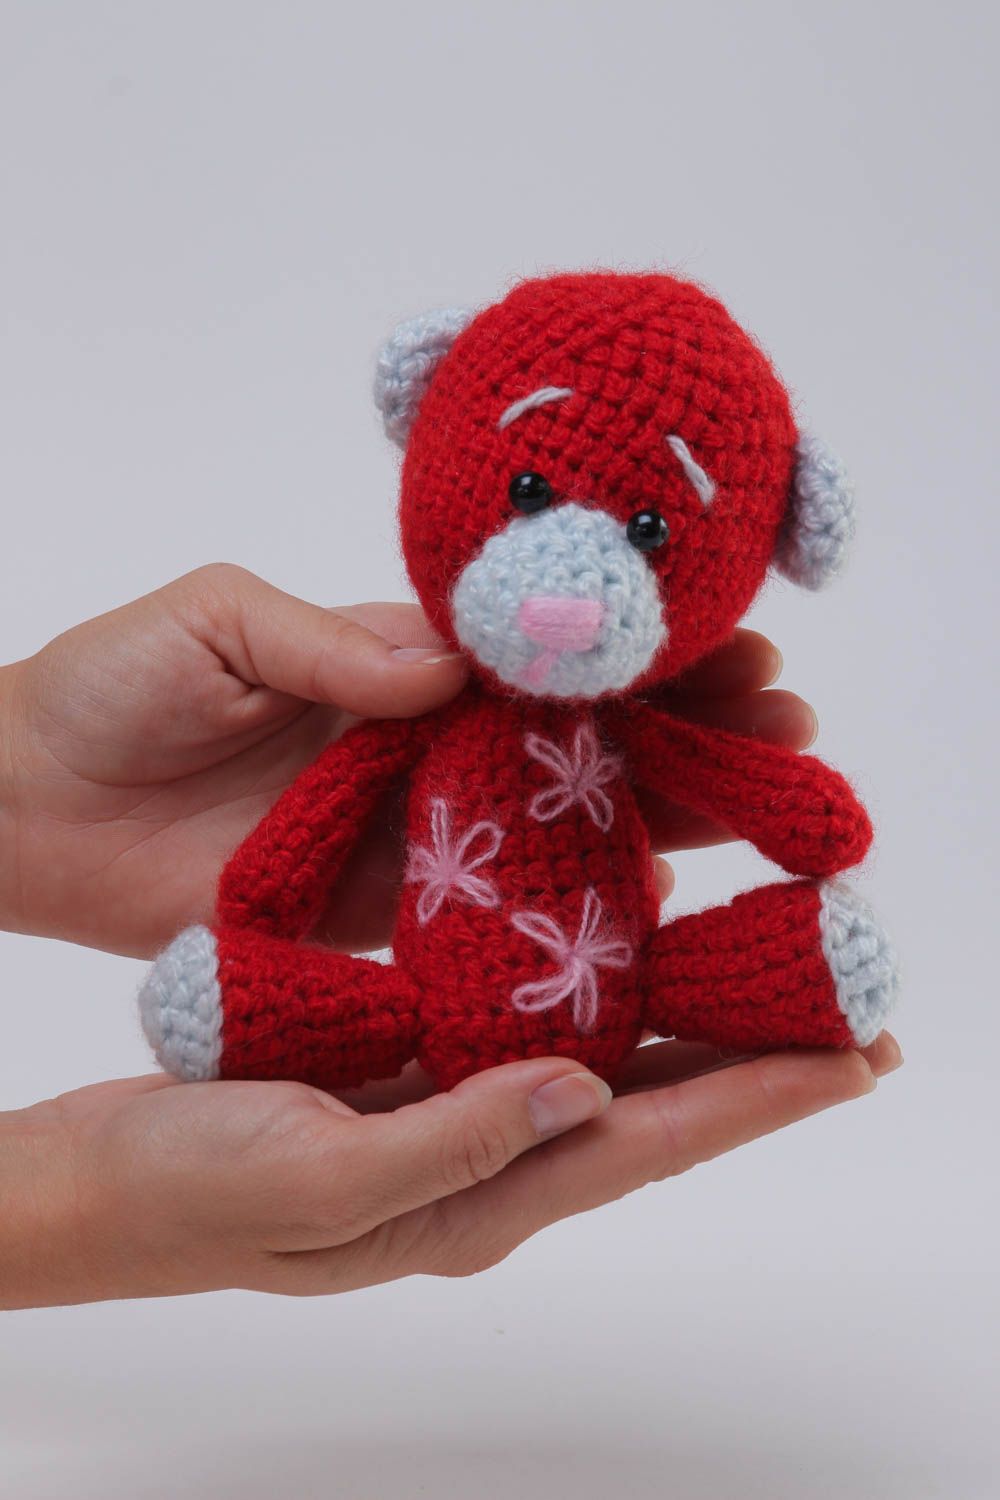 Handmade crochet soft toy childrens toys interior decorating gifts for kids photo 5